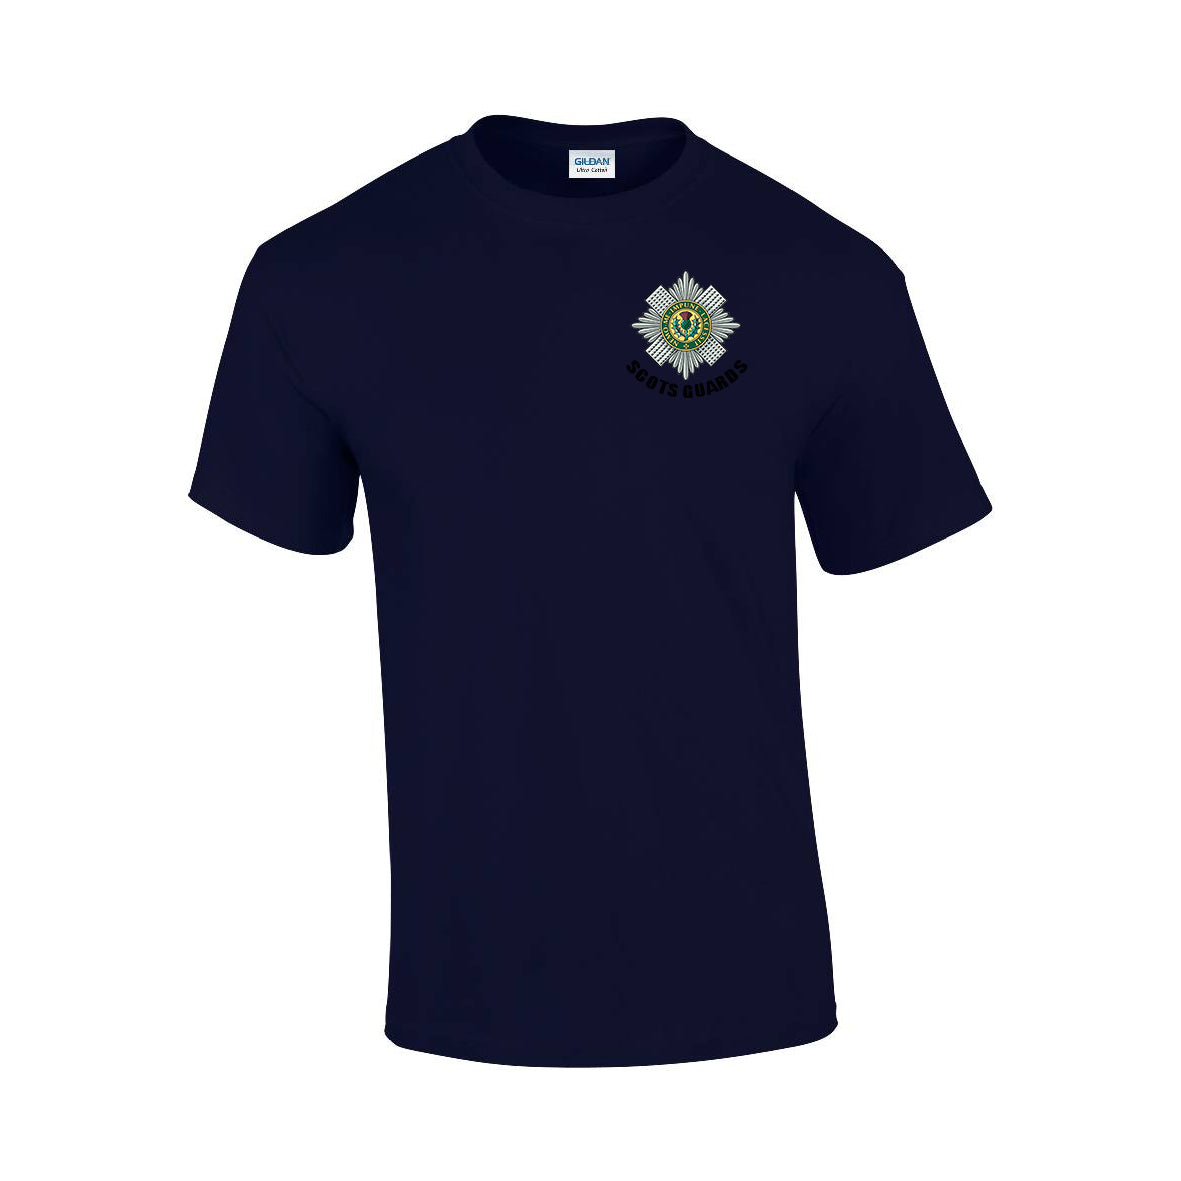 GD02 - Scots Guards Premium Quality Embroidered T-Shirt - Bespoke Emerald Embroidery Ltd